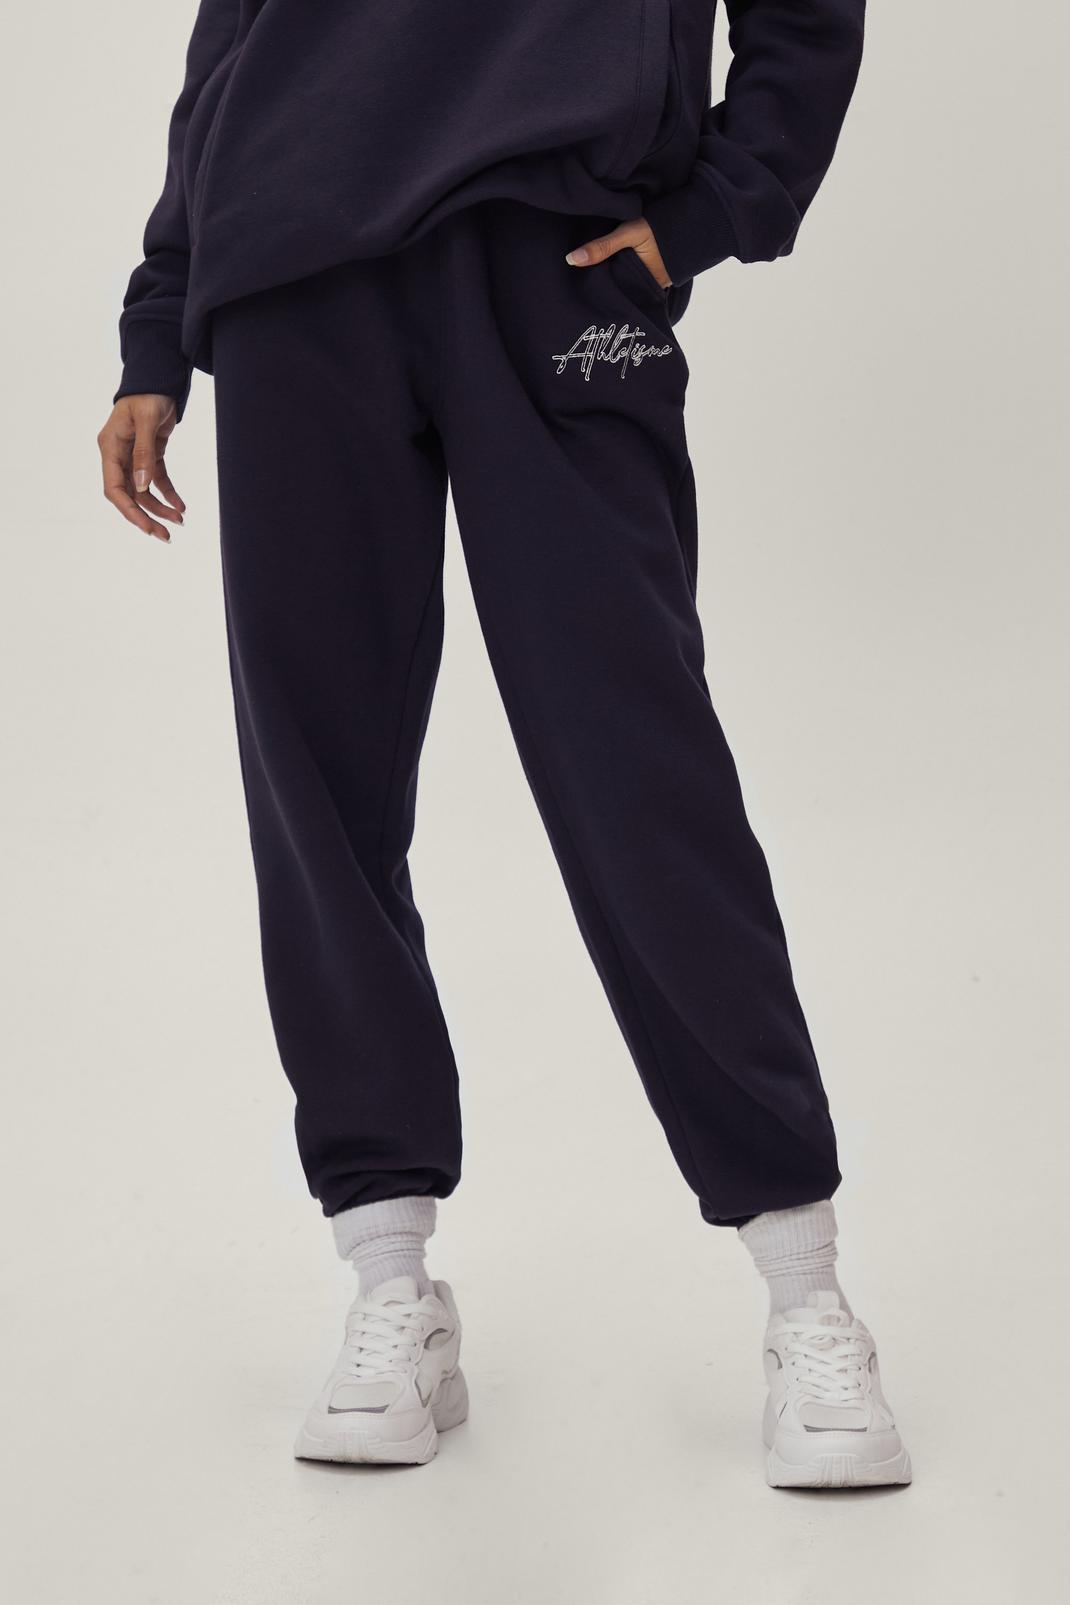 Navy Embroidered Athleisure Relaxed Fit Tracksuit Pants image number 1